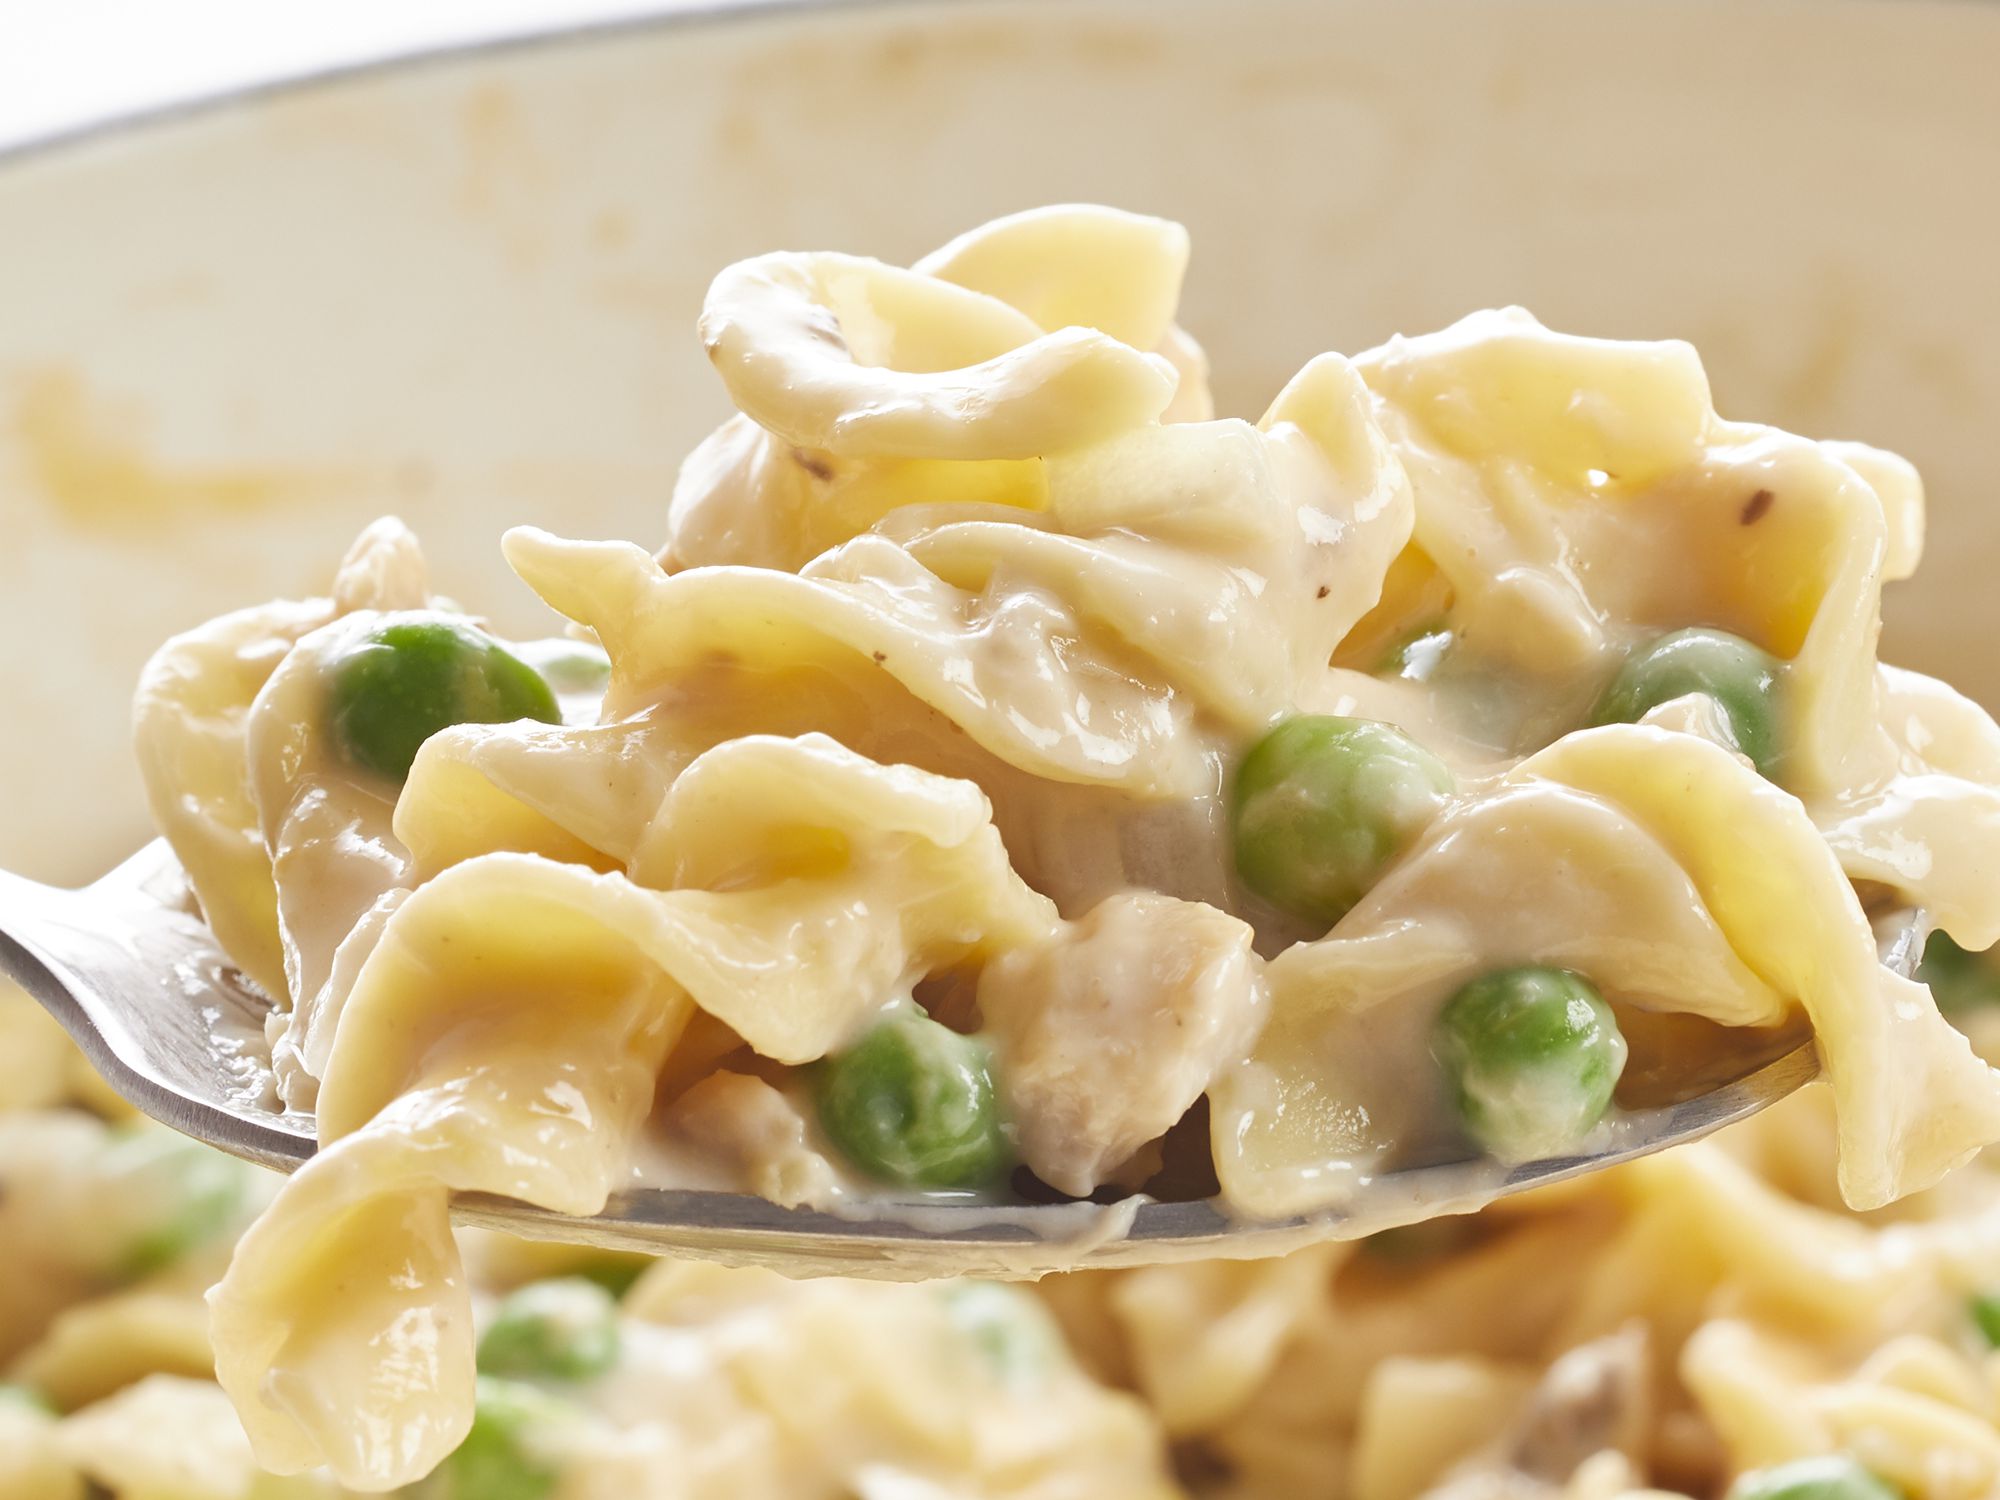 What do you eat with tuna casserole?